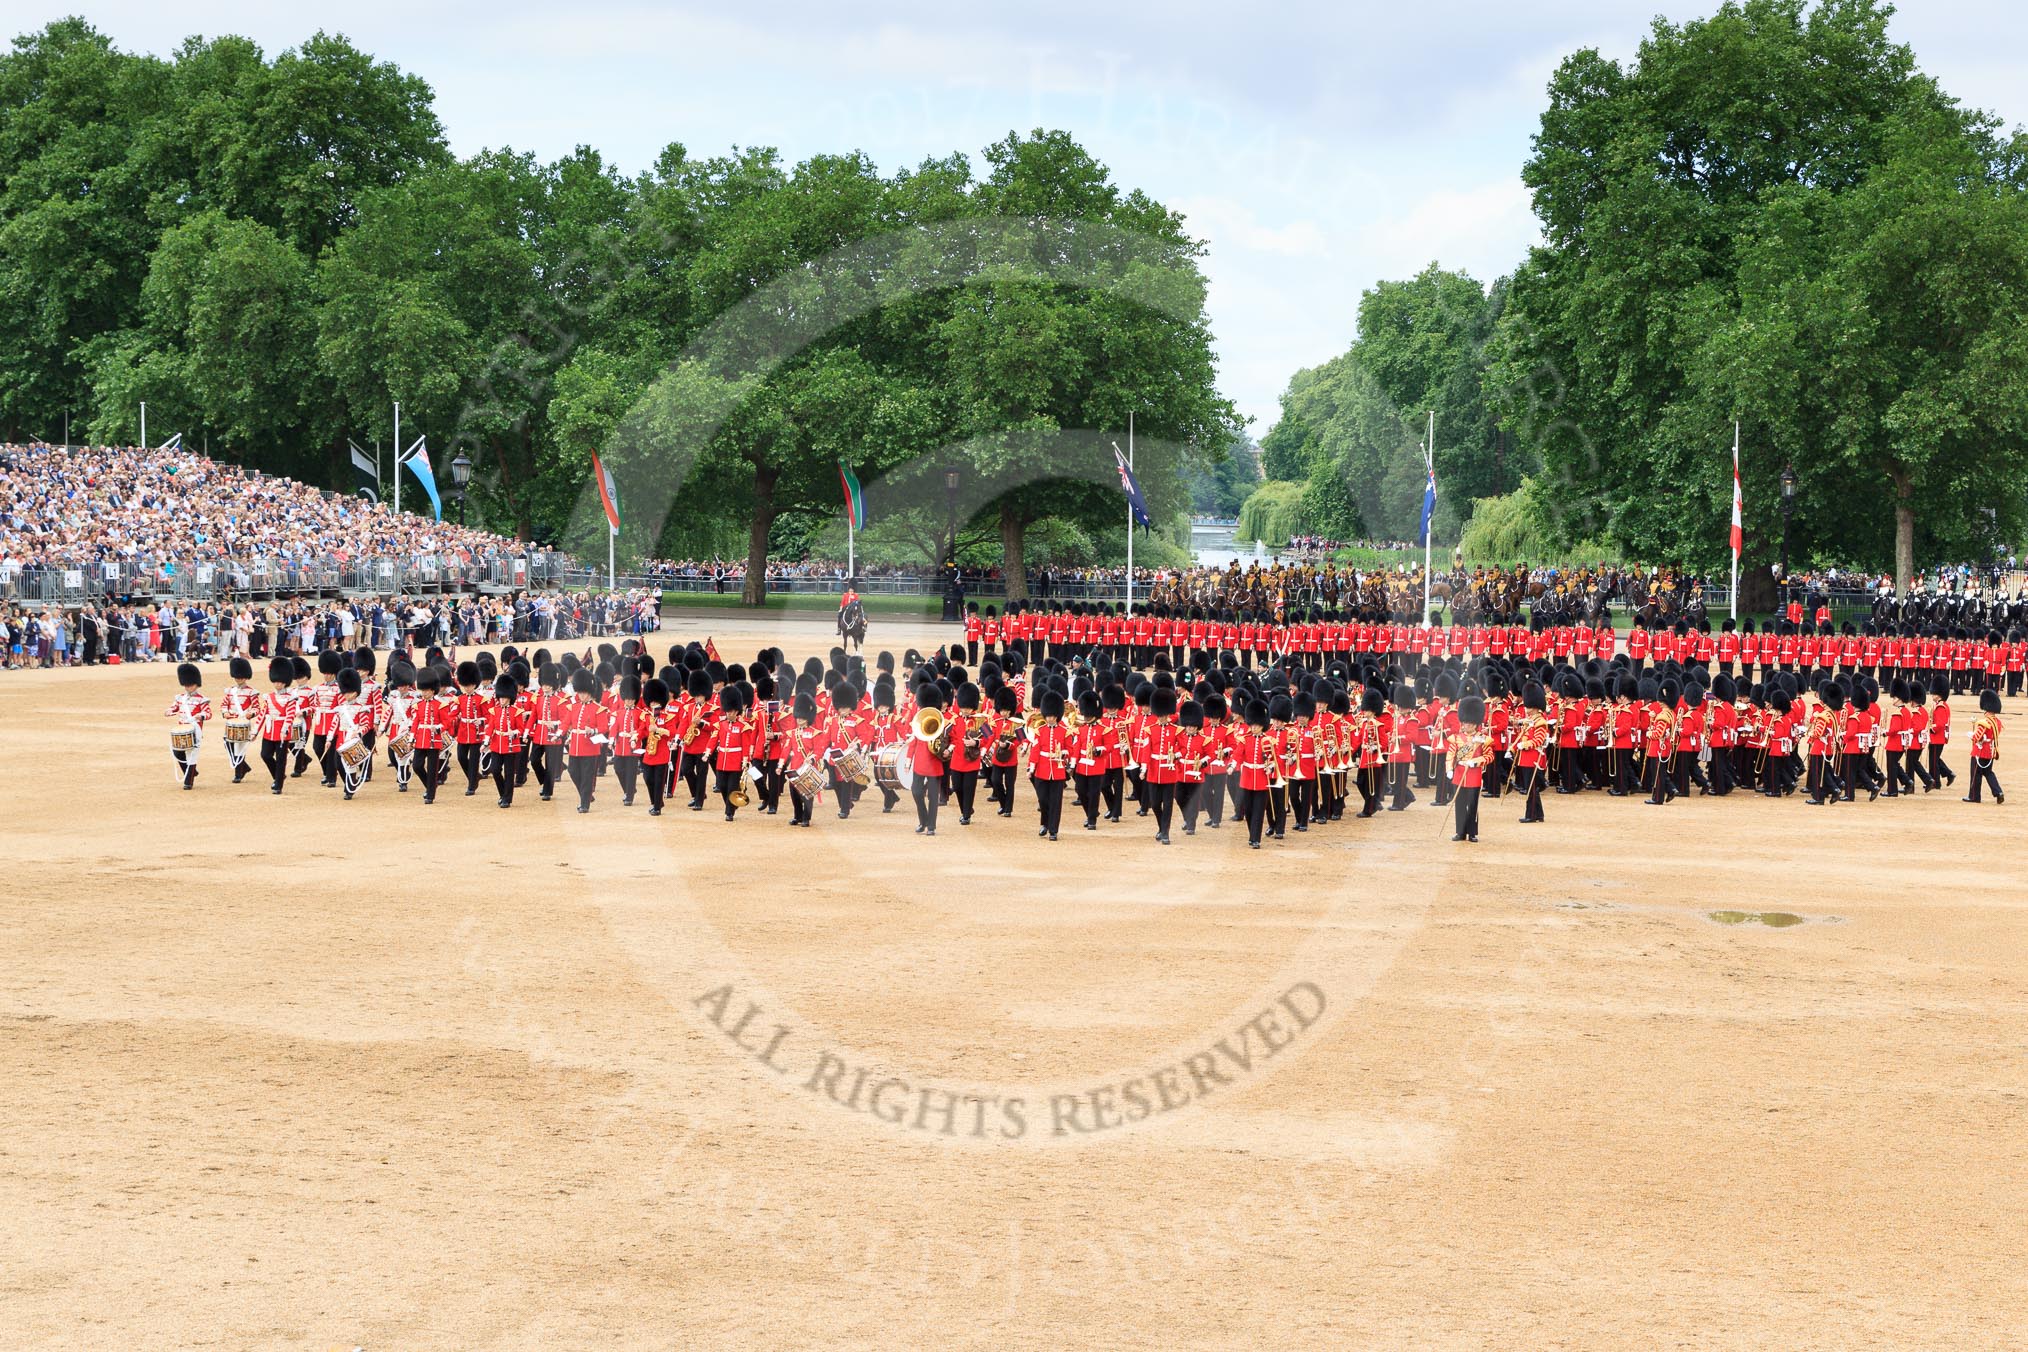 during The Colonel's Review {iptcyear4} (final rehearsal for Trooping the Colour, The Queen's Birthday Parade)  at Horse Guards Parade, Westminster, London, 2 June 2018, 11:54.